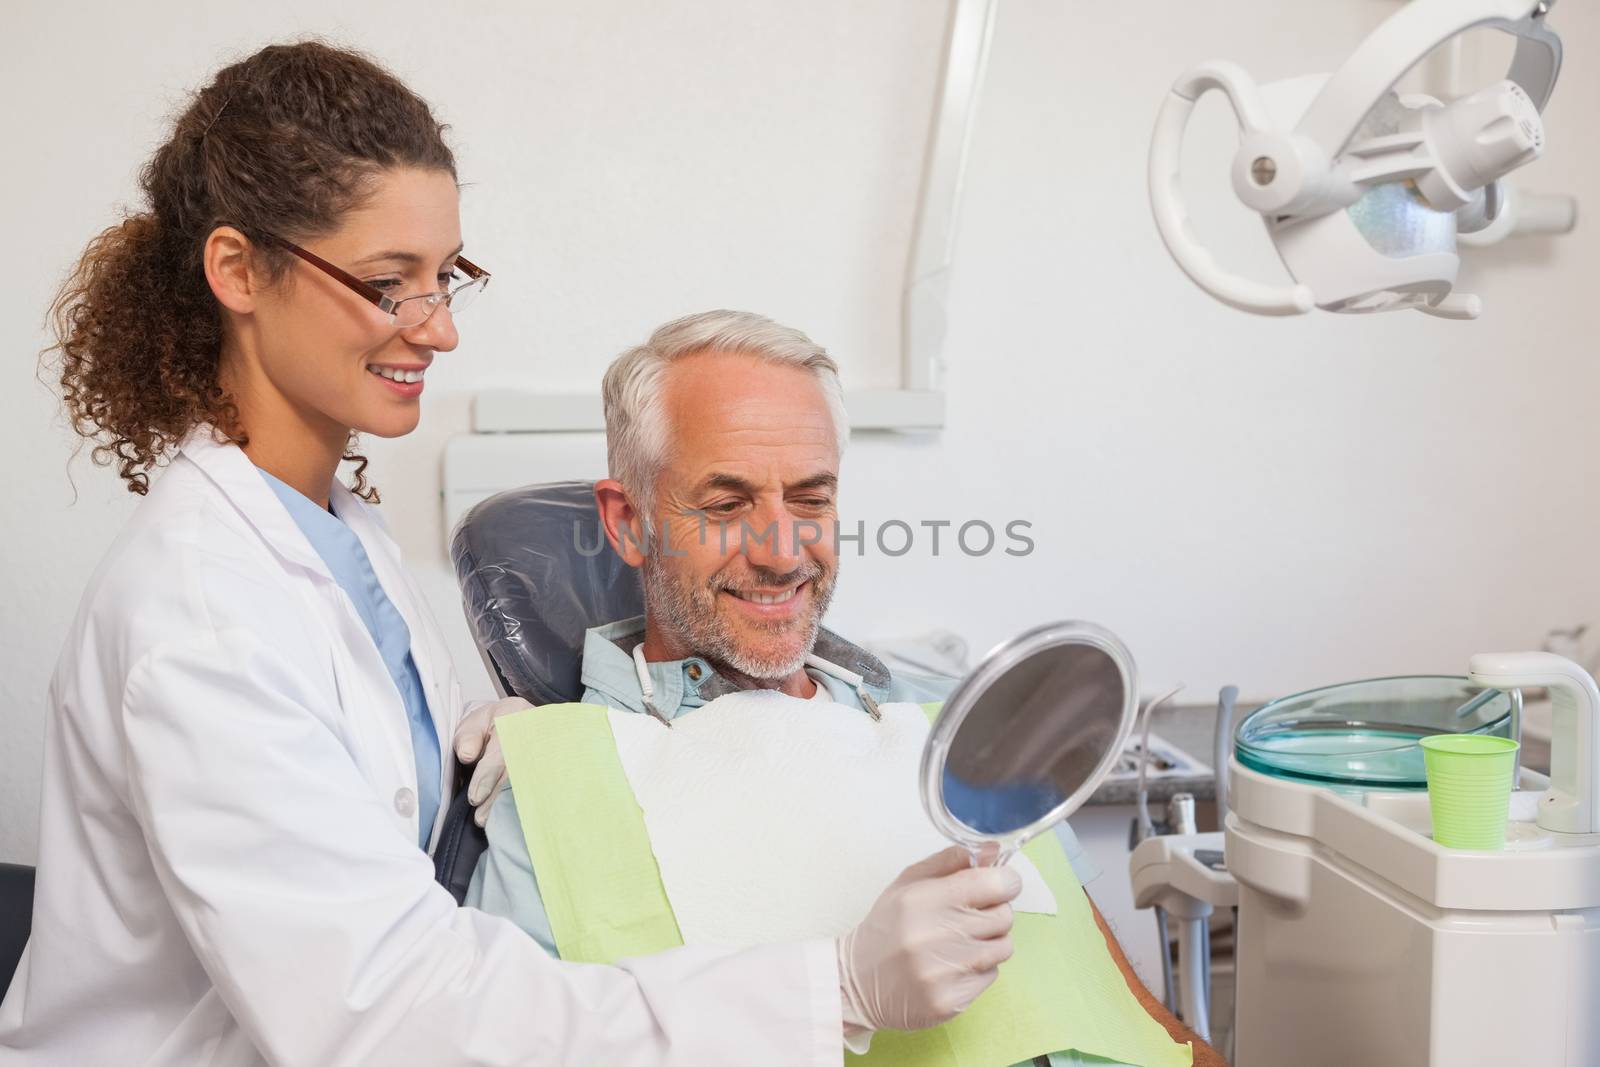 Dentist showing patient his new smile in the mirror by Wavebreakmedia